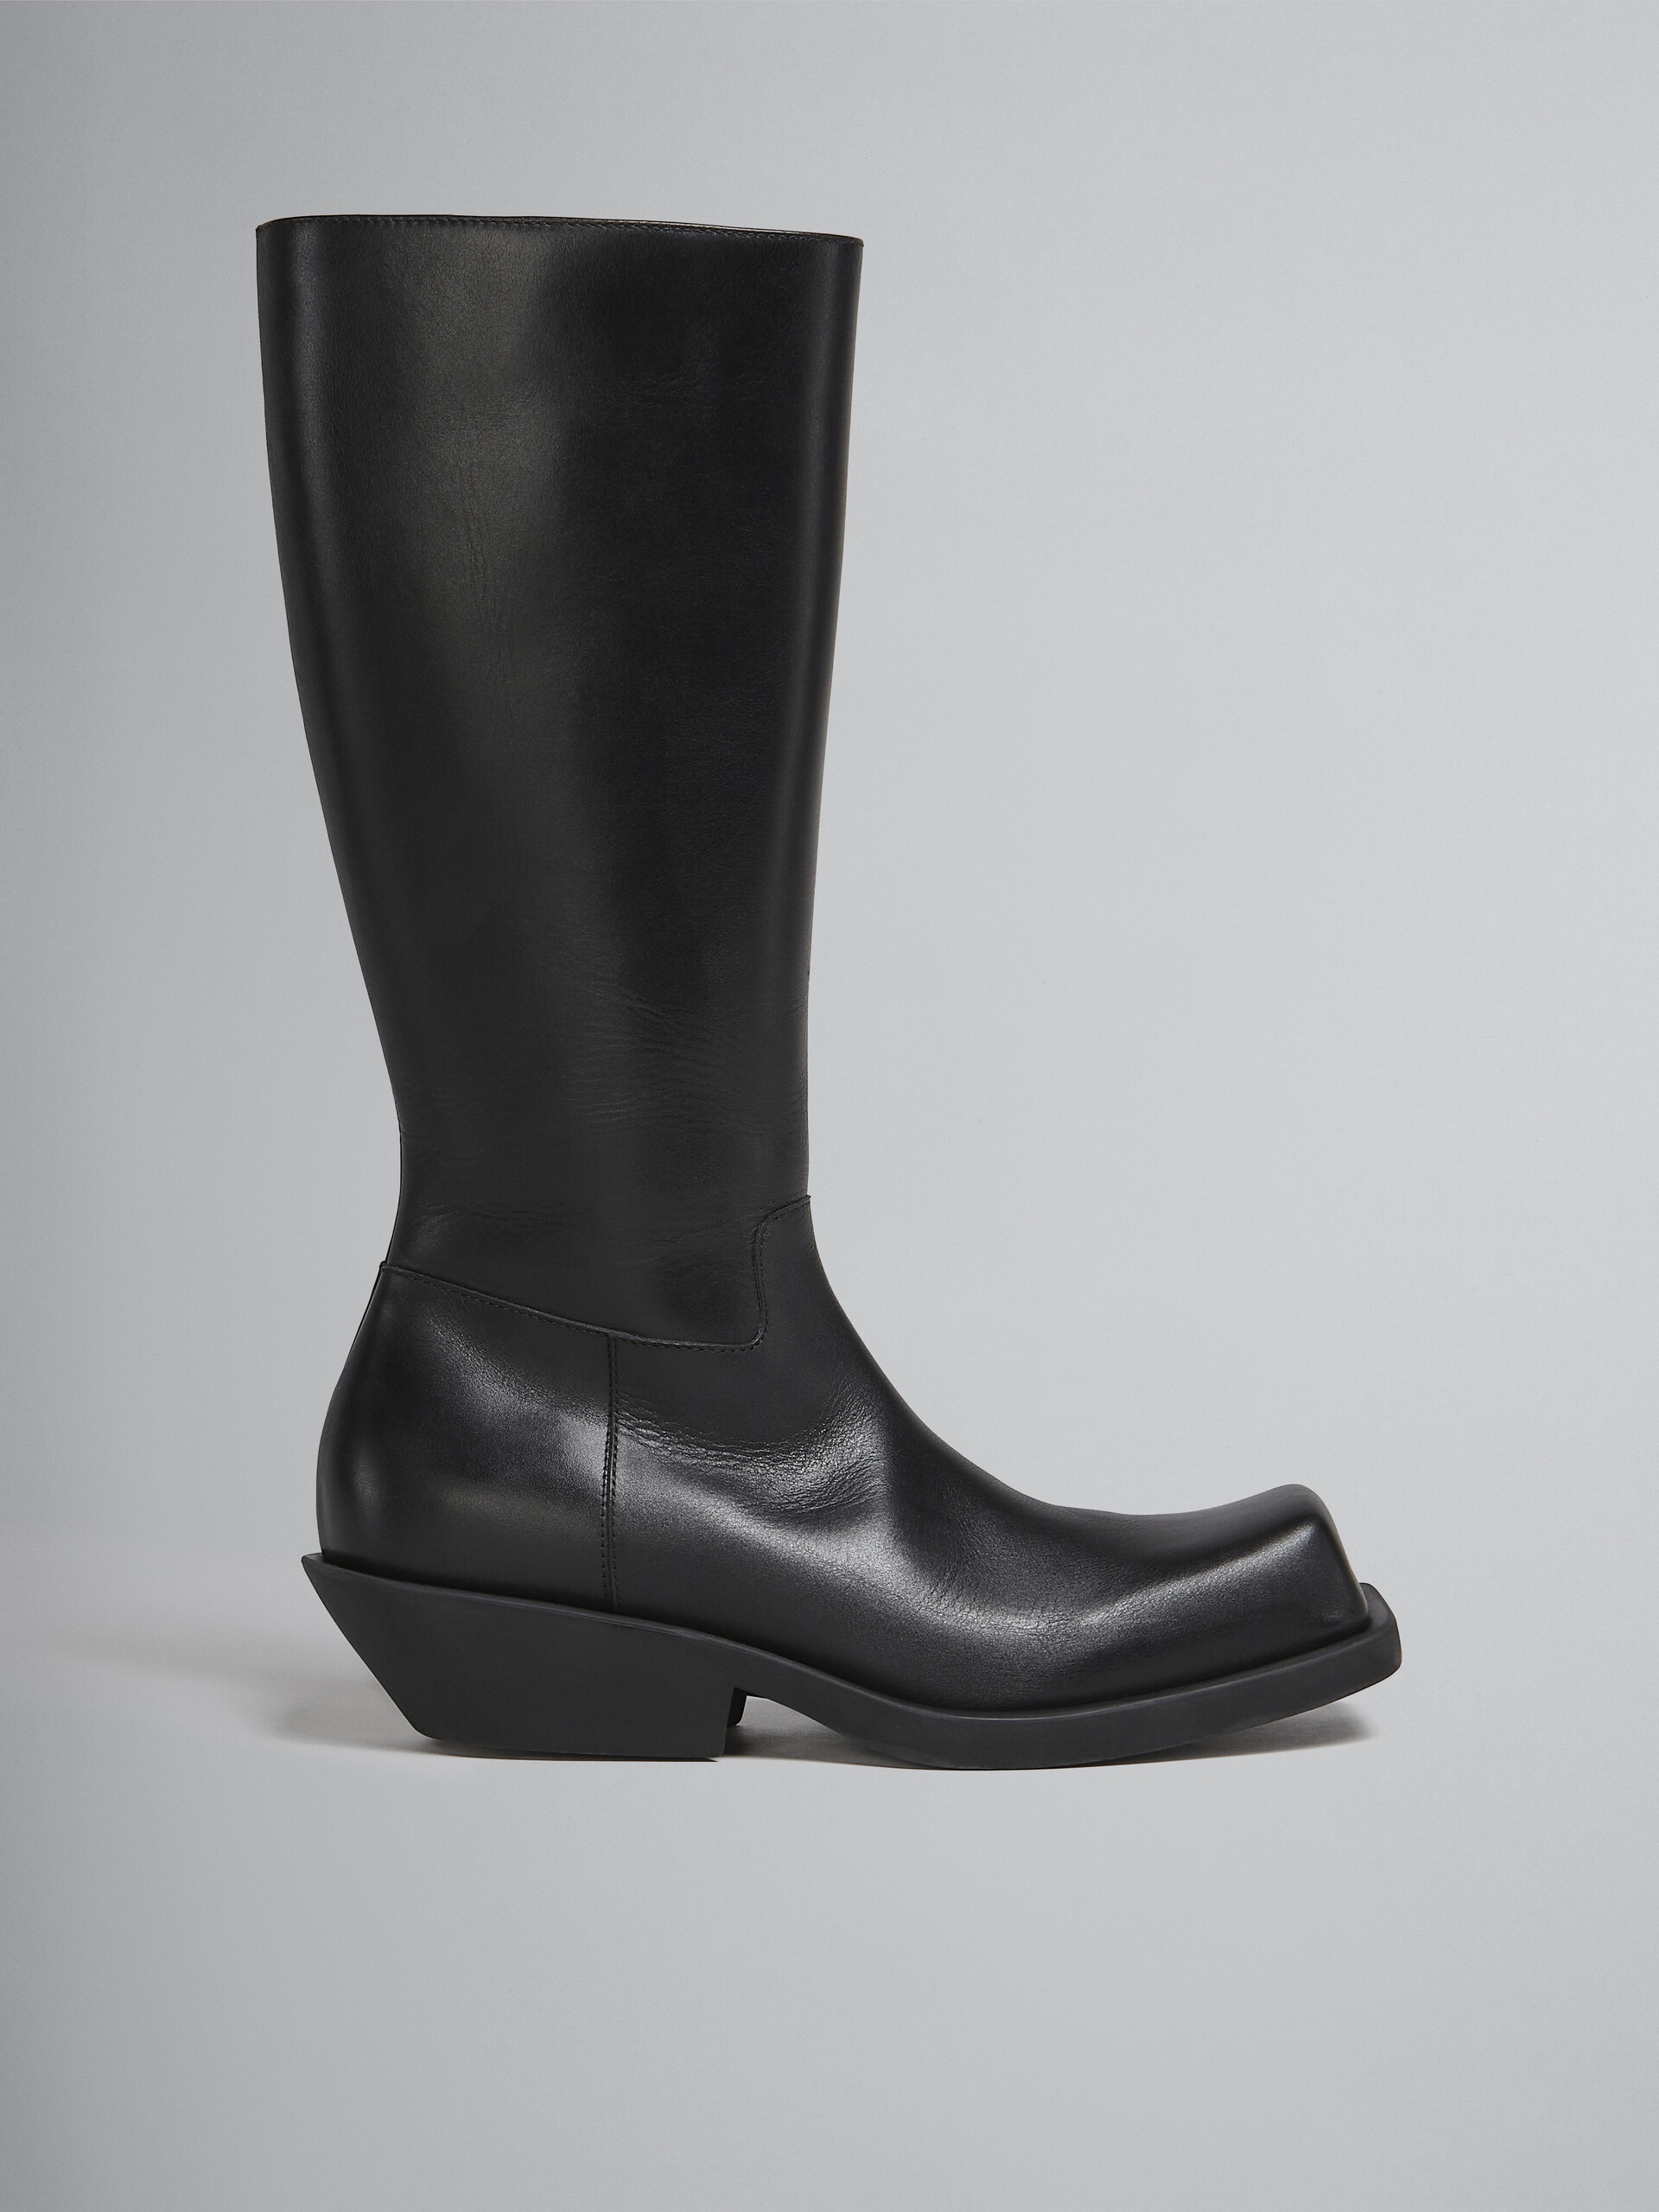 Black leather boot - Boots - Image 1